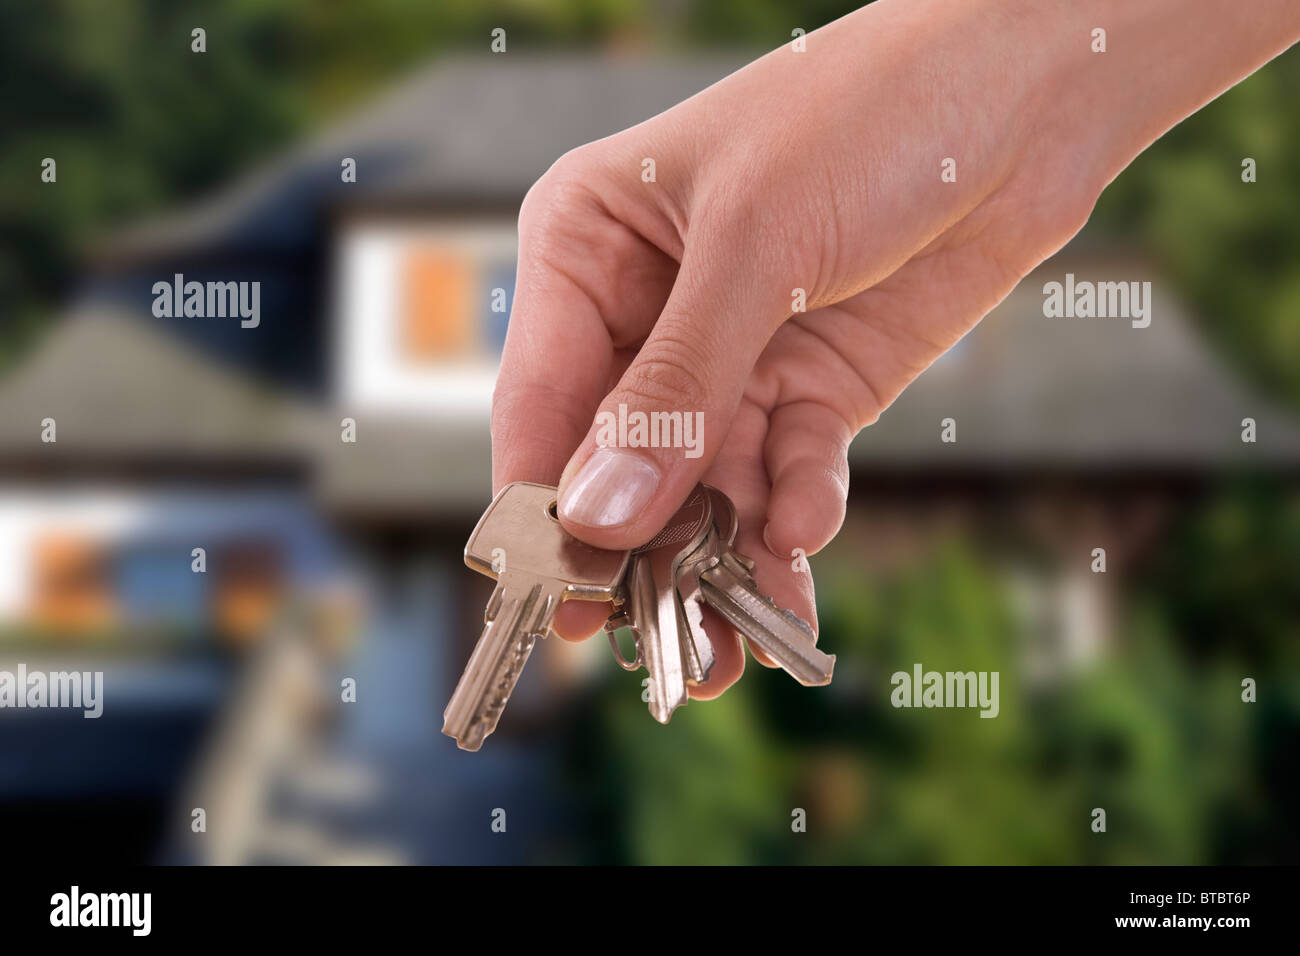 handing keys in the house background Stock Photo